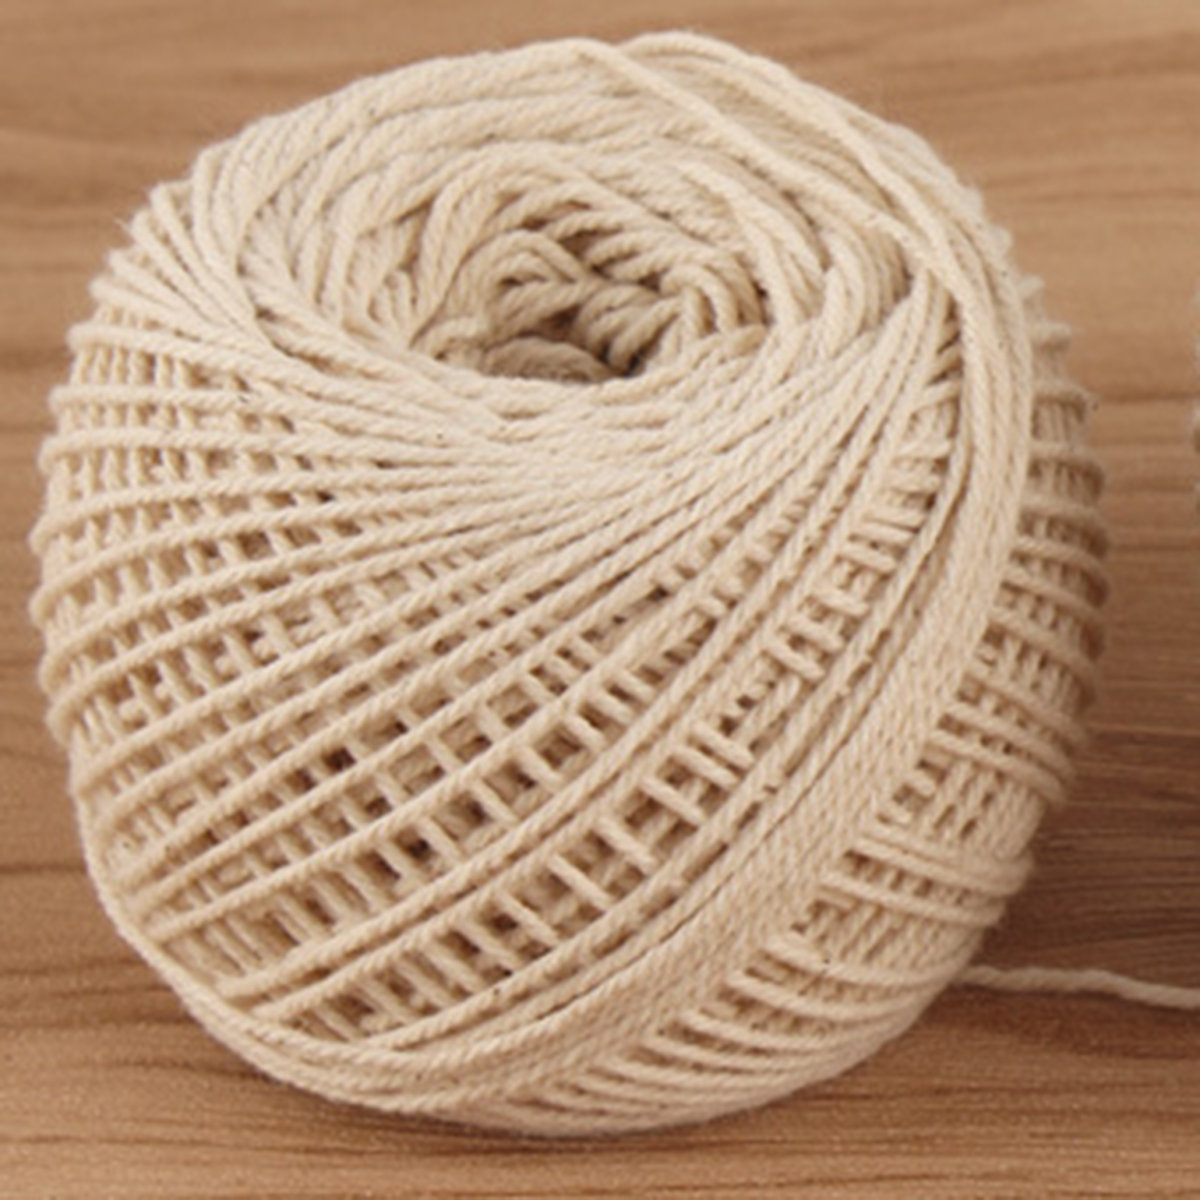 

100M Natural Cotton String Clip Twisted Cord Craft Macrame 1- Stringcotton, Beige;white